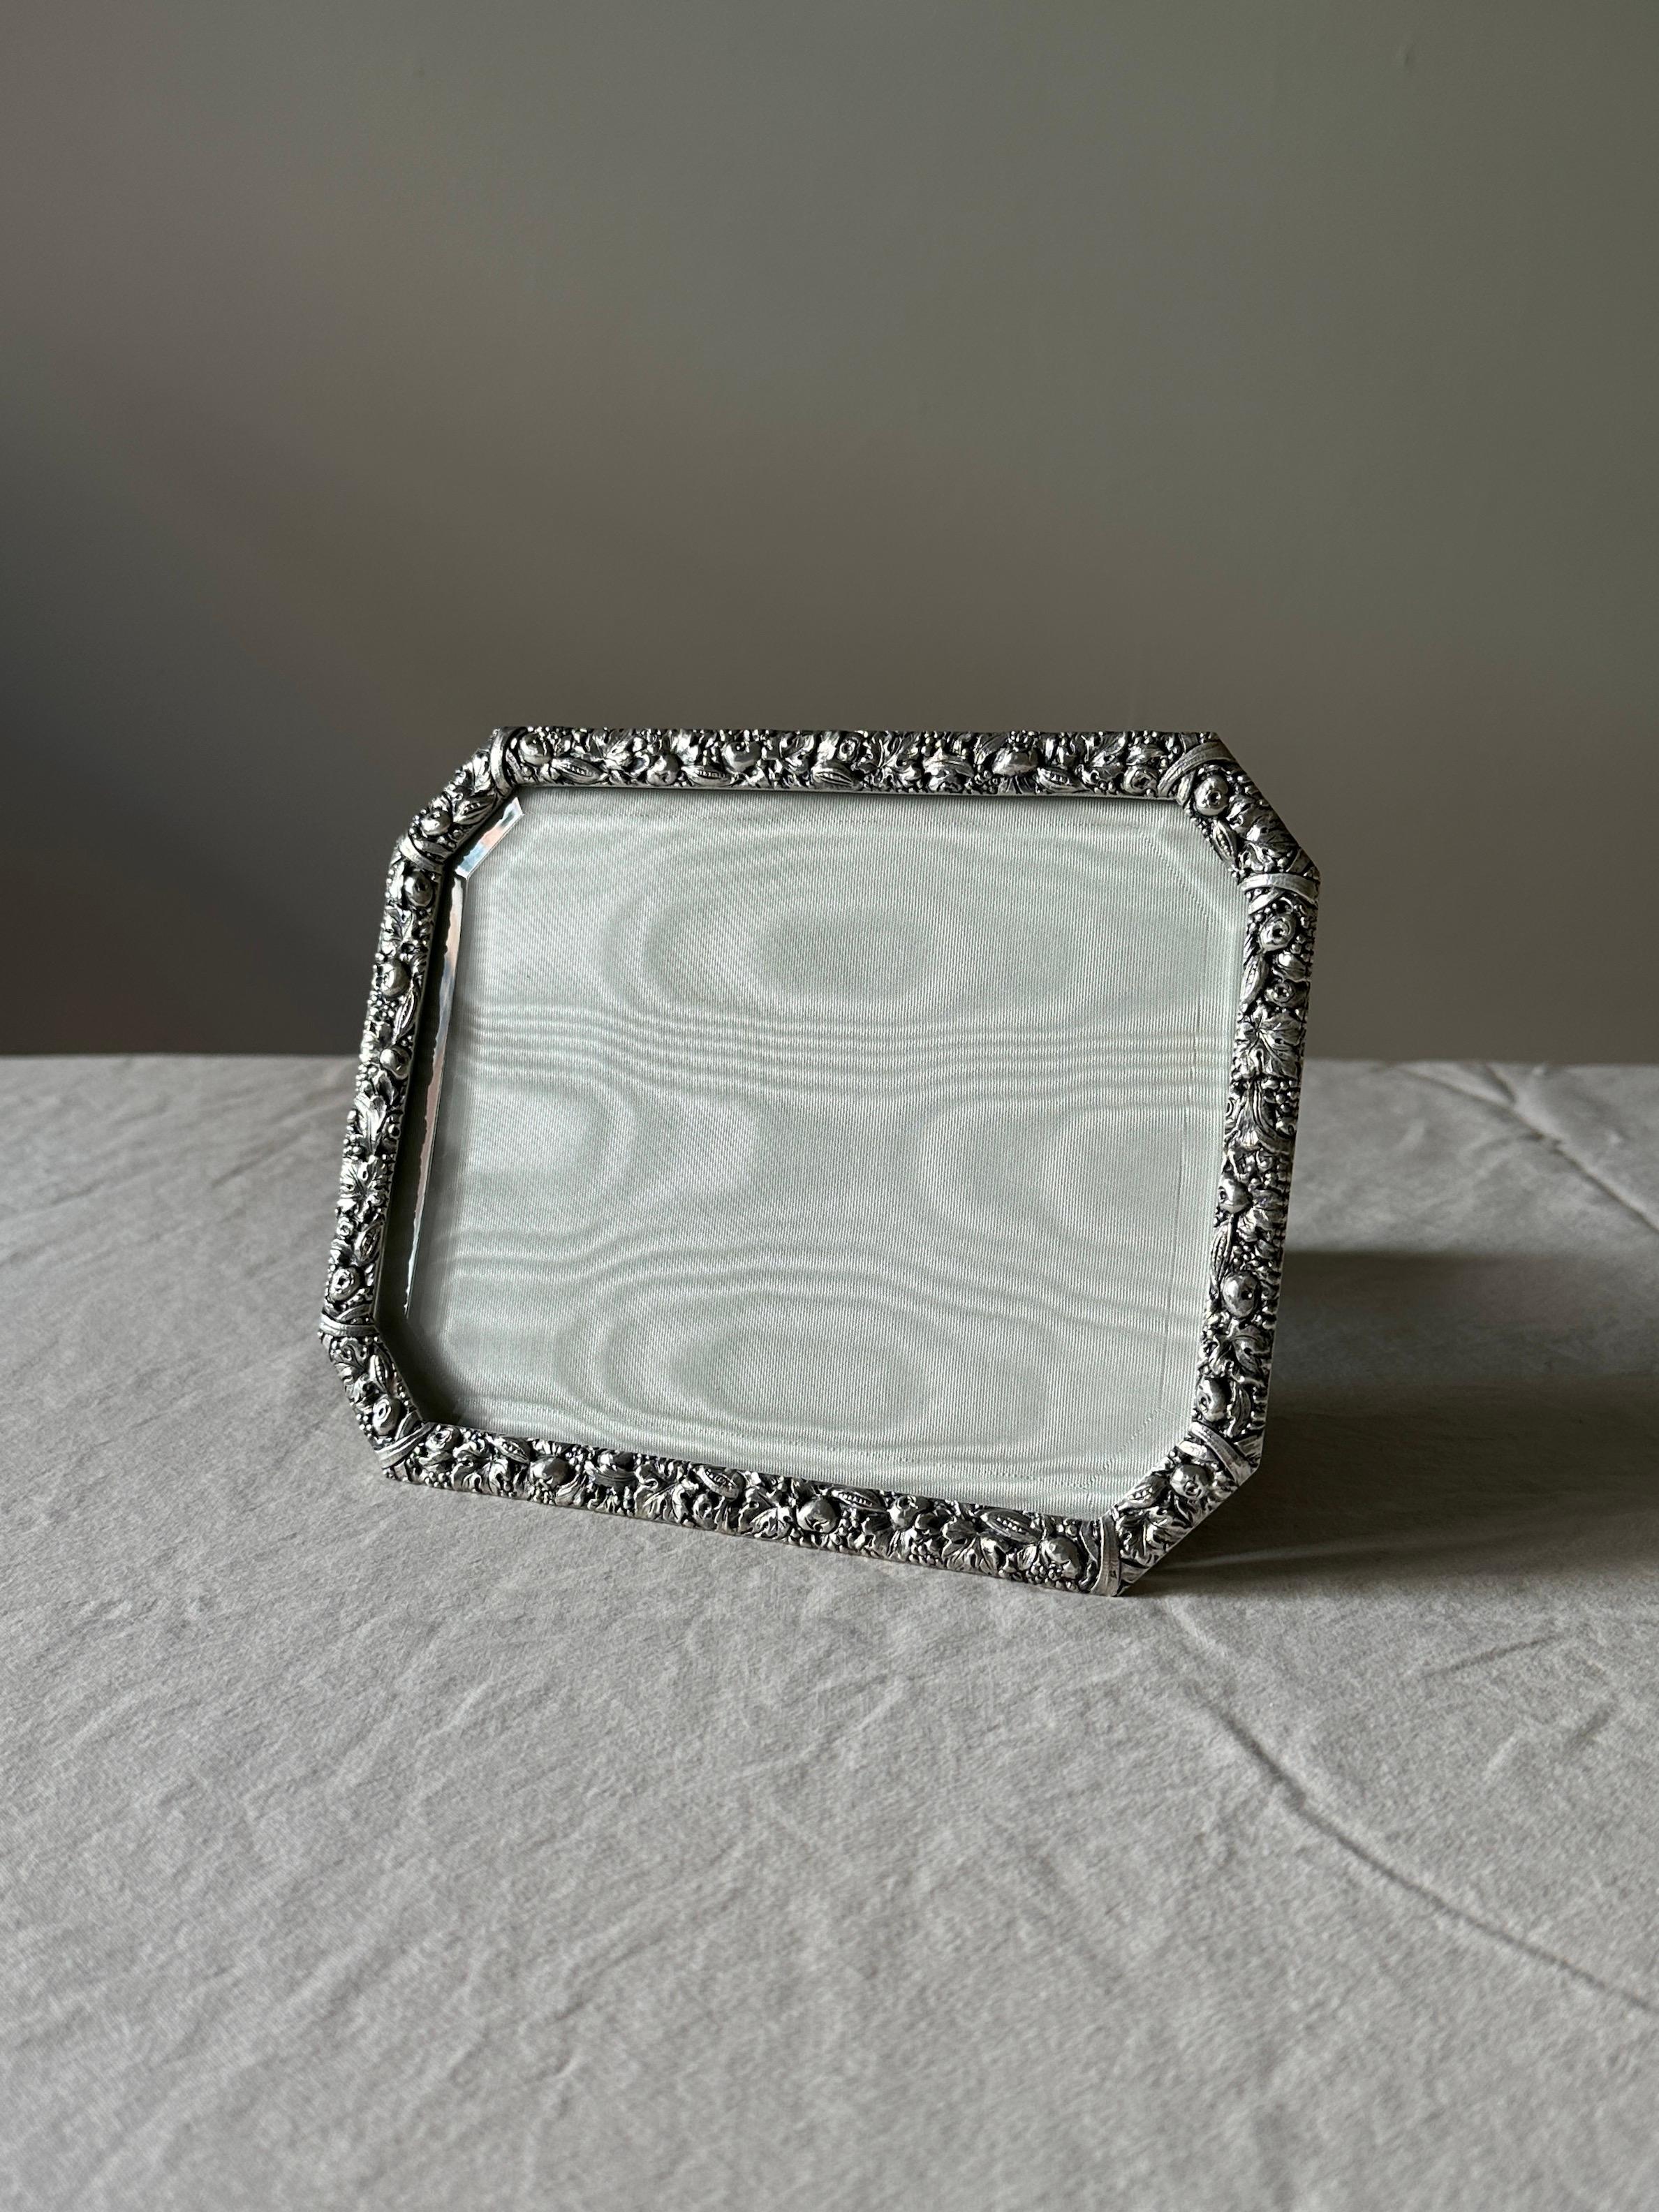 A repoussé Sterling Silver picture frame attributed to Ilario Pradella , Milan, late 20th century (1960/69). Pradella was known for his exceptional work with Buccellati.